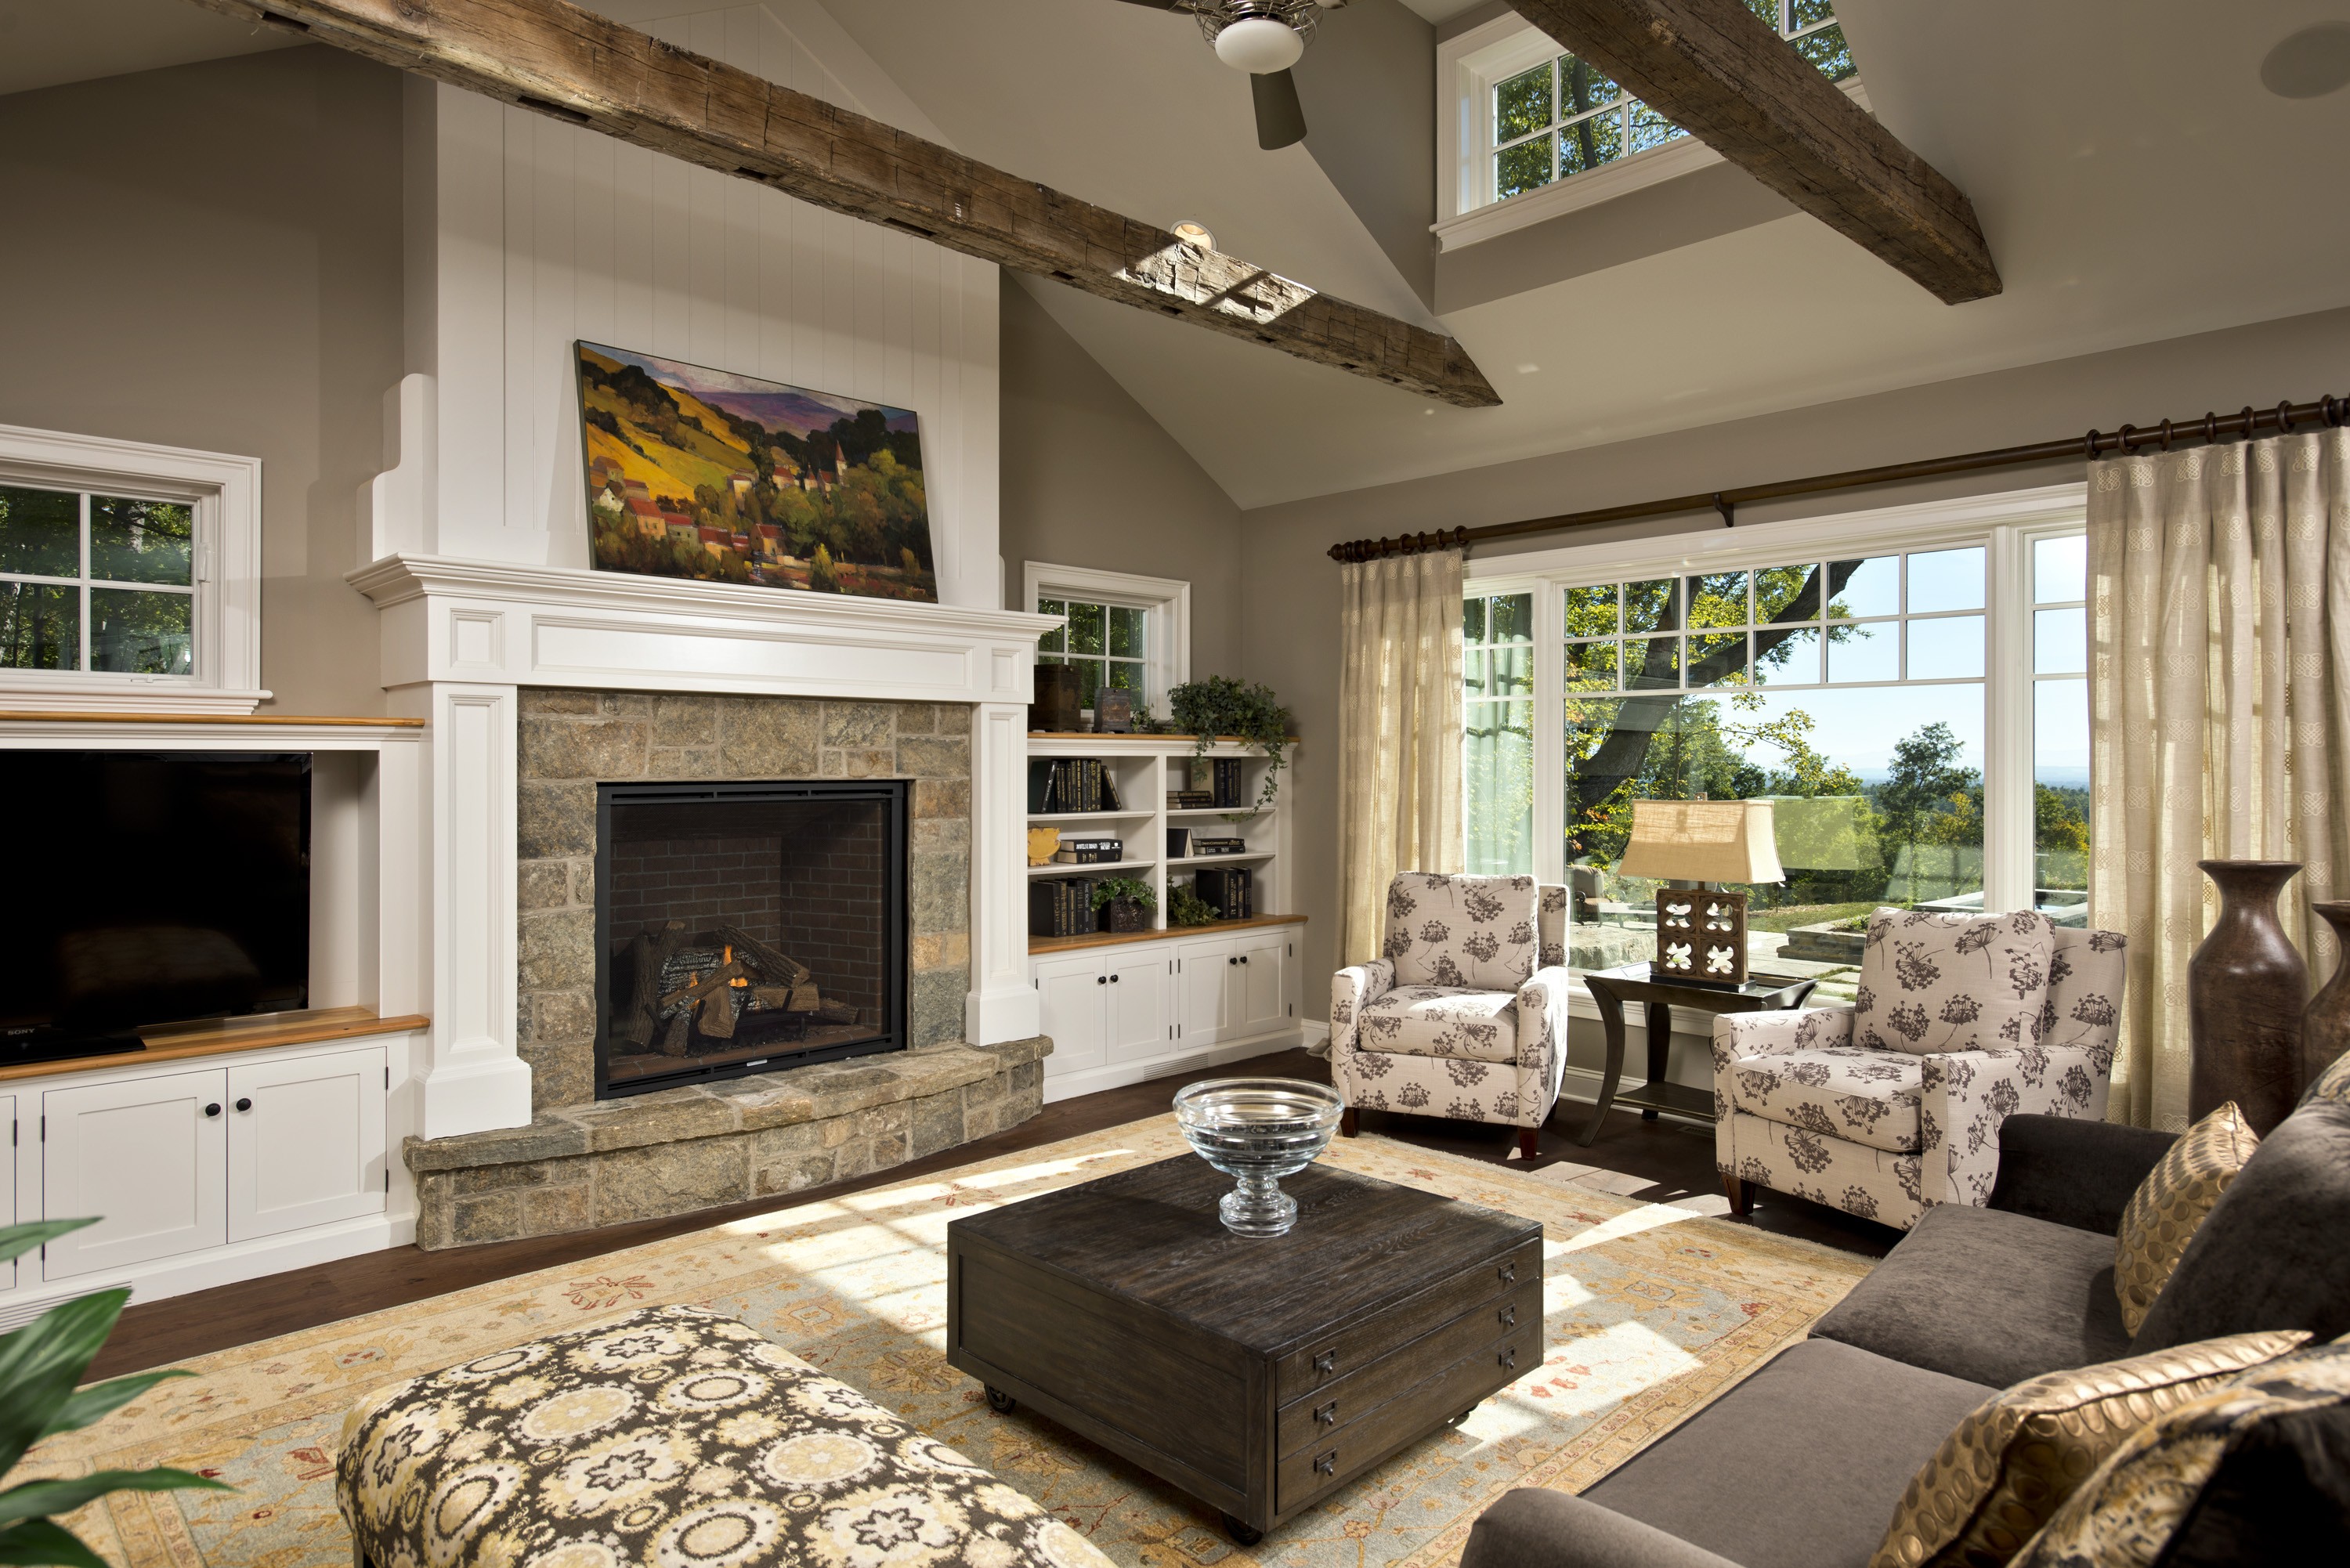 7 Cozy Fireplaces to Warm You Up This Winter | HuffPost3000 x 2002